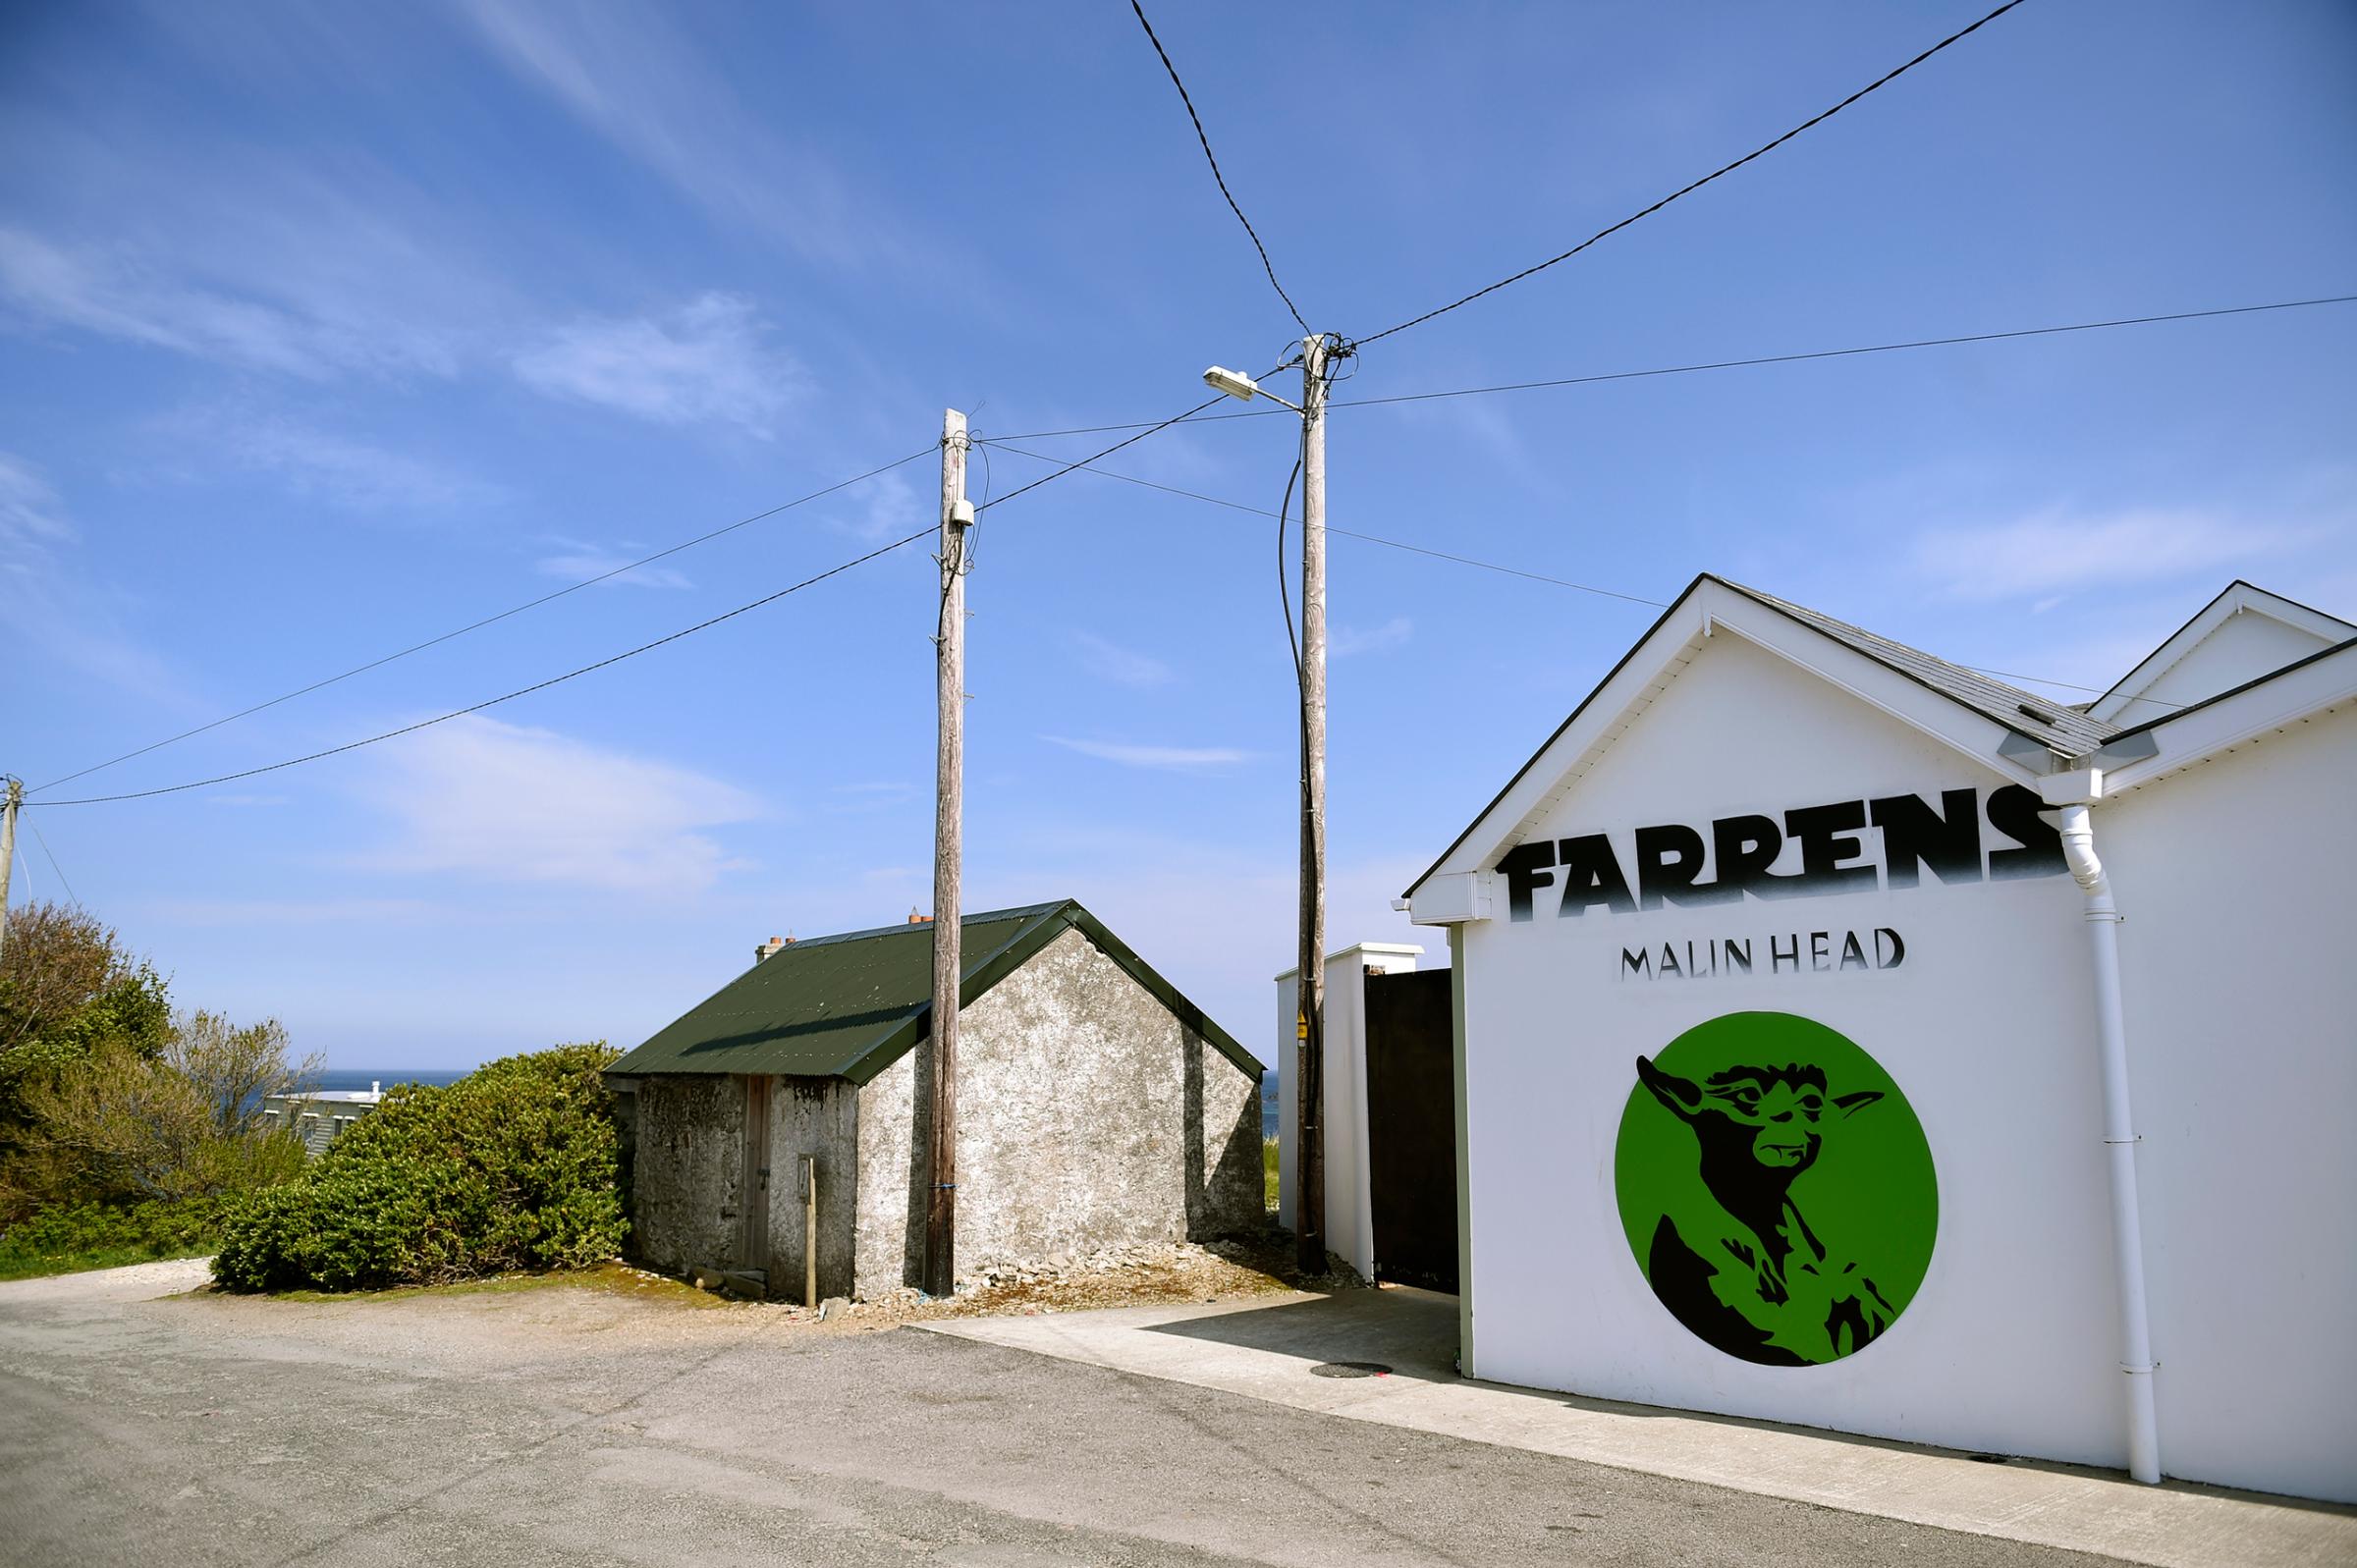 Ireland's most Northerly bar, Farrens, is seen with mural art of Star Wars character Yoda at Malin Head in Ireland on May 11, 2016.